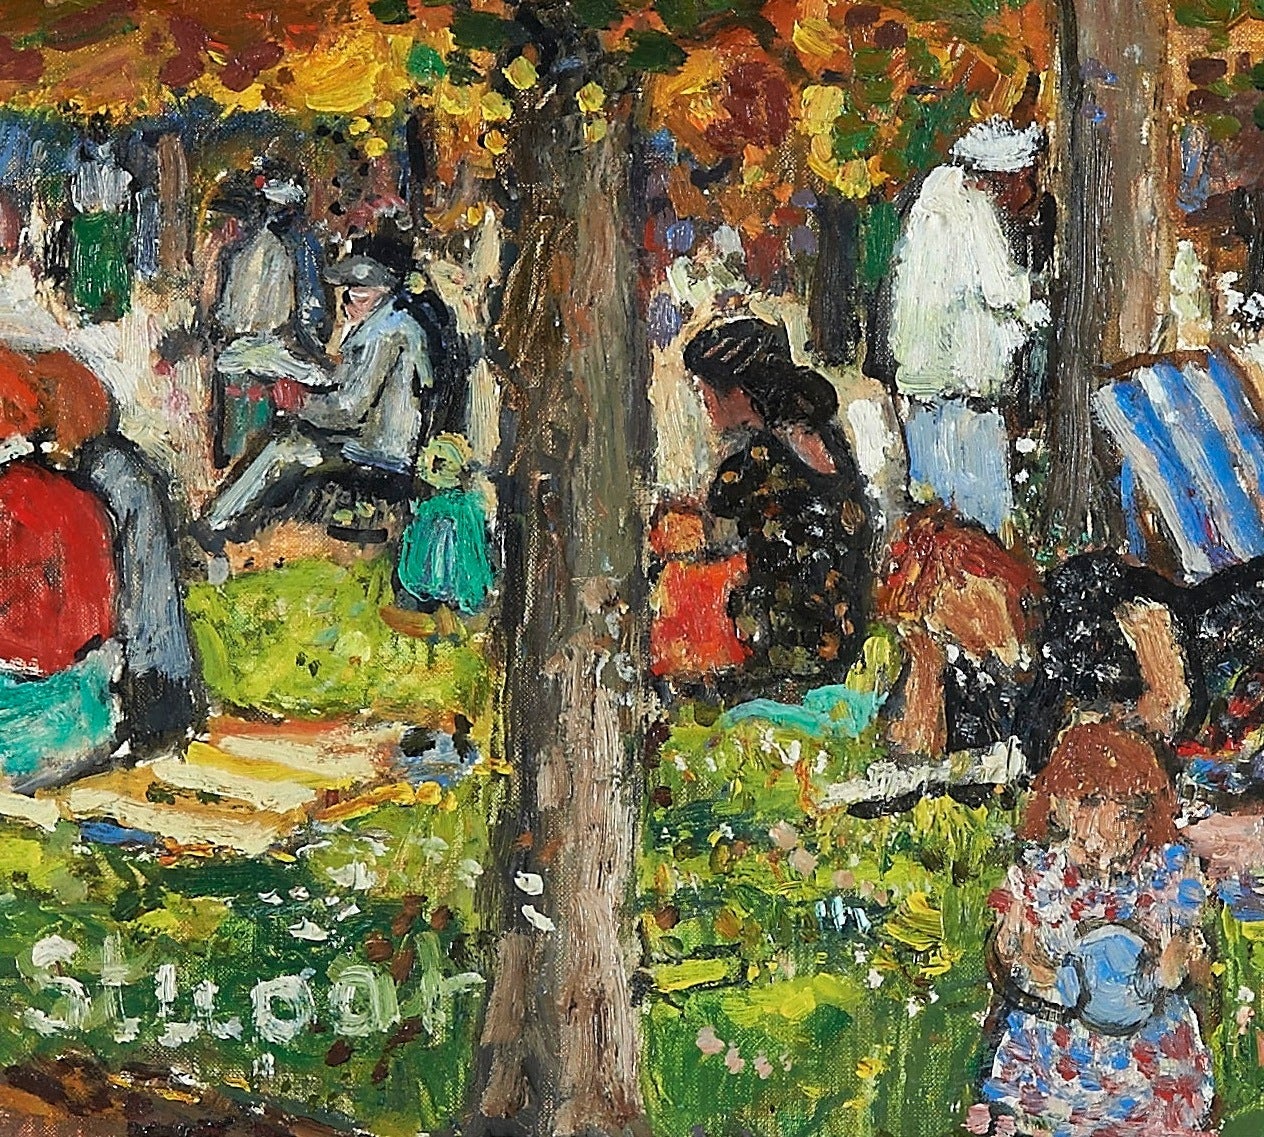 At the park in Paris - Painting by Marko STUPAR